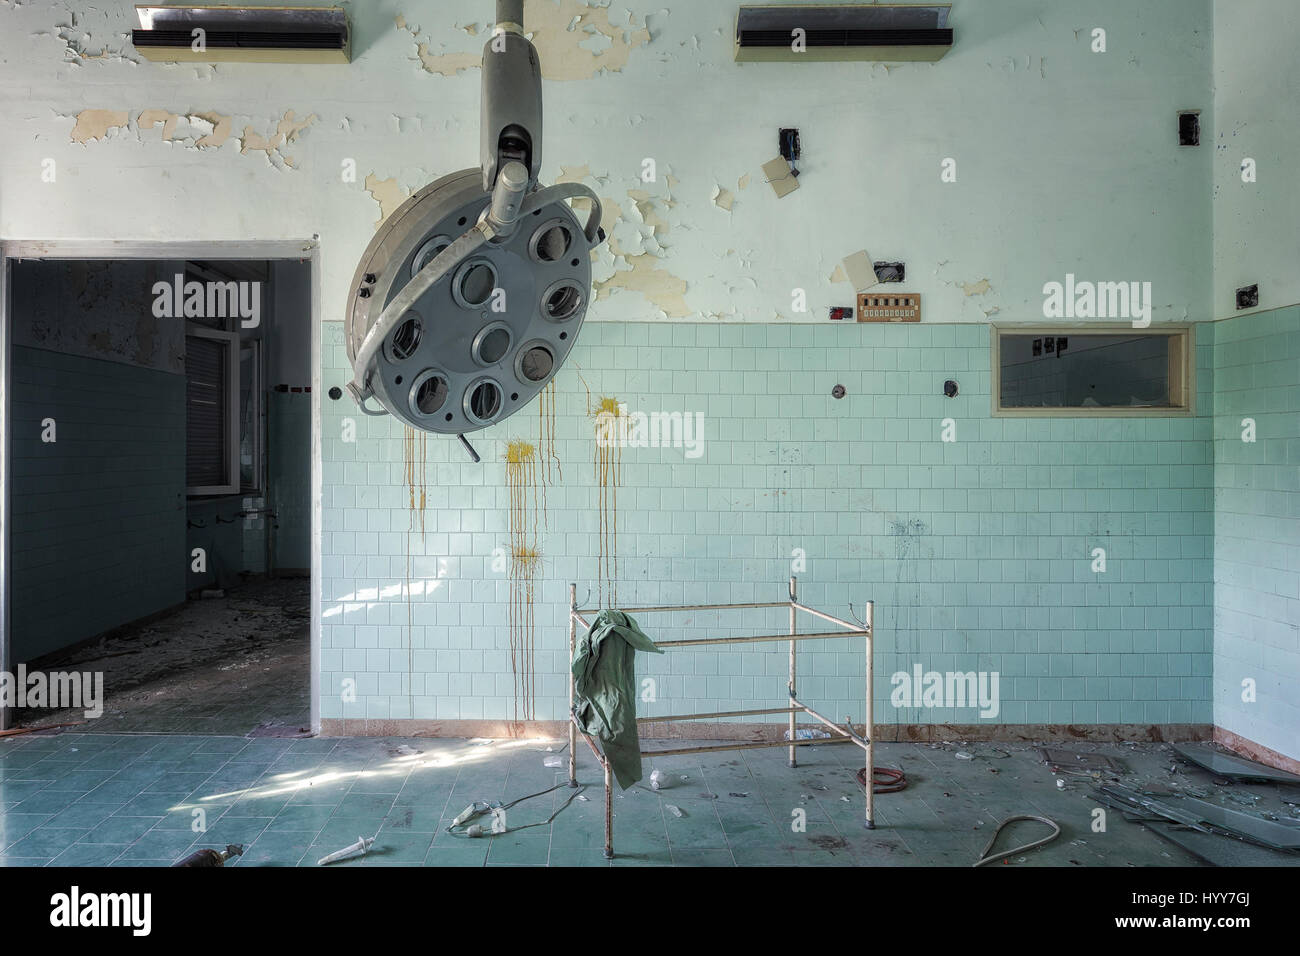 EERIE images of Europe’s most spooky abandoned hospitals show just how frightening these once sparkling medical facilities can be. The haunting shots show the beds patients would have recovered on as well as the tables and instruments that would have been used during grim operations. Peeling, flaking paint and crumbling walls are prevalent in some of the hospitals while others look almost untouched by time. The spooky pictures were taken by Austrian photographer Stefan Baumann (35) from Vienna as he travelled across Europe. Stock Photo